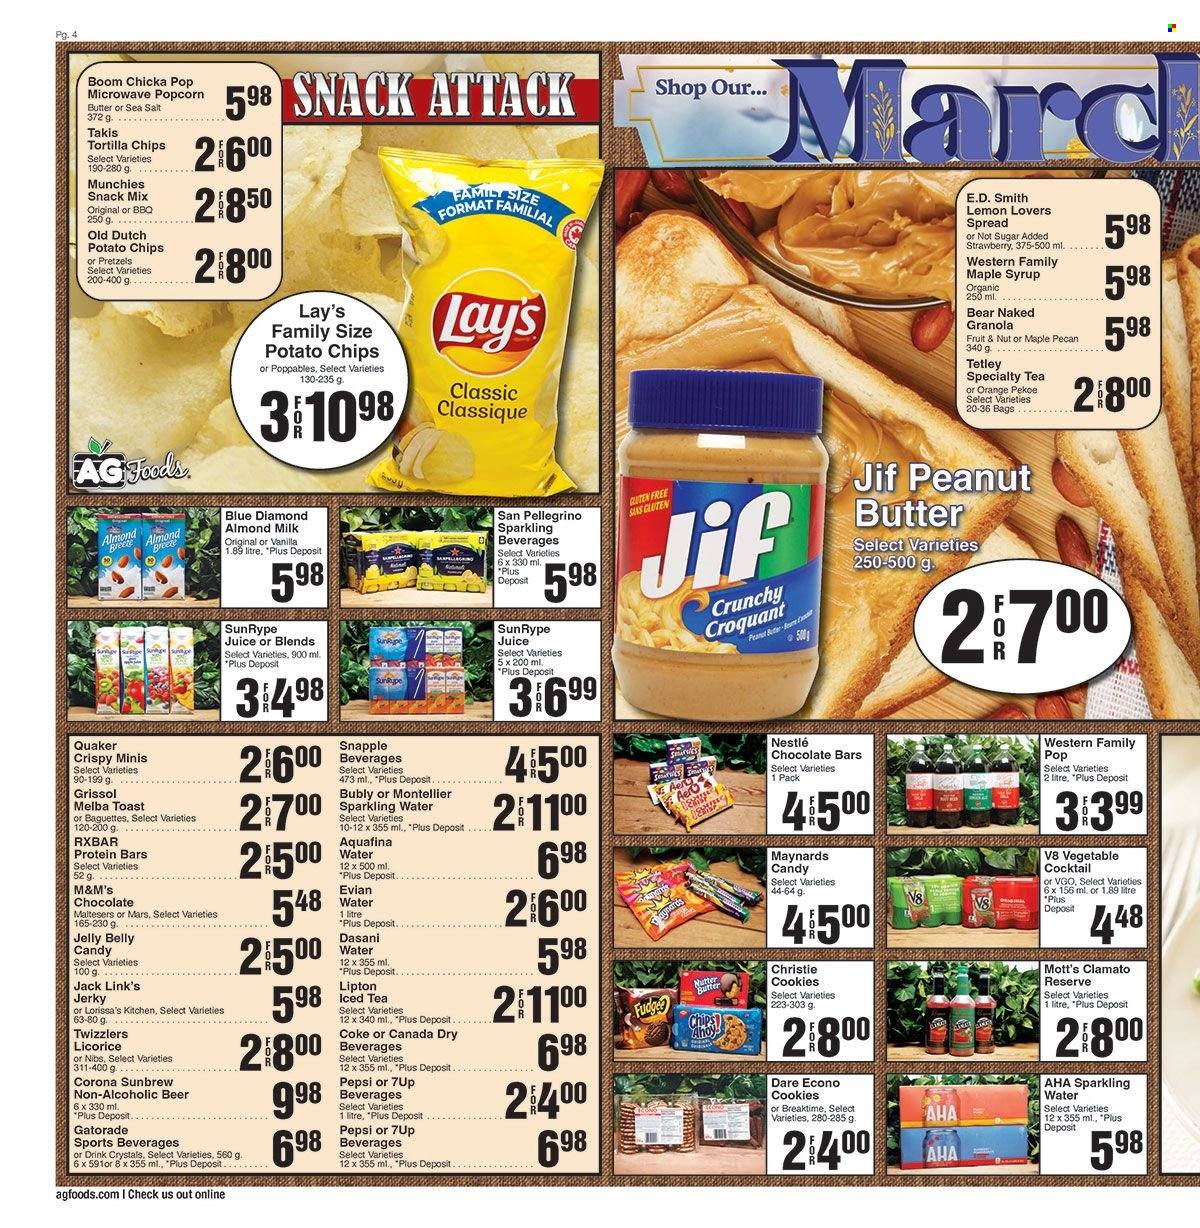 thumbnail - AG Foods Flyer - March 19, 2023 - March 25, 2023 - Sales products - pretzels, oranges, Mott's, Quaker, jerky, almond milk, milk, cookies, fudge, snack, Mars, jelly, Maltesers, chocolate bar, tortilla chips, potato chips, chips, Lay’s, popcorn, Jack Link's, sugar, protein bar, maple syrup, peanut butter, syrup, Jif, Blue Diamond, Canada Dry, Coca-Cola, Pepsi, juice, ice tea, Clamato, 7UP, Snapple, Gatorade, Coke, Aquafina, sparkling water, Evian, San Pellegrino, water, beer, Corona Extra, baguette, granola, Nestlé, Lipton, M&M's. Page 4.